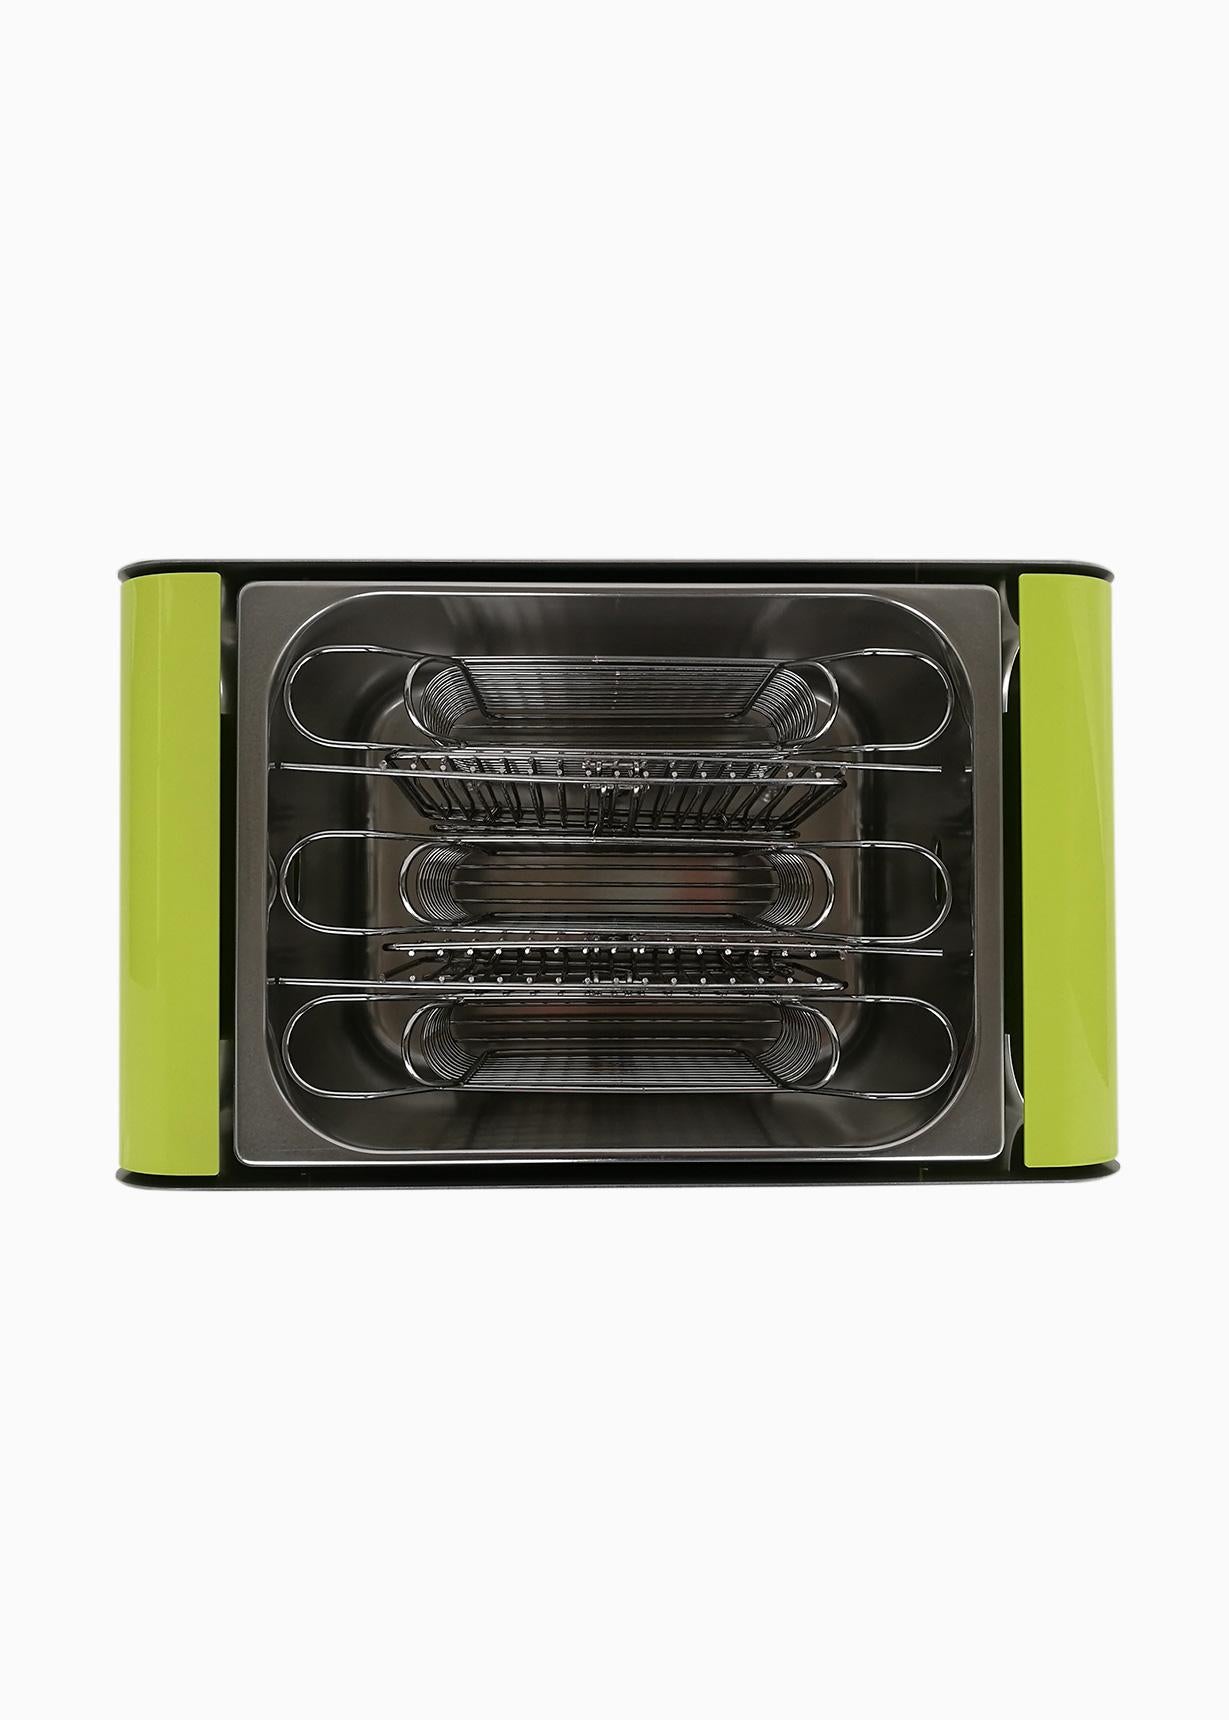 Upright Cooking Charcoal Barbecue, Grill Green (Moderne) im Angebot